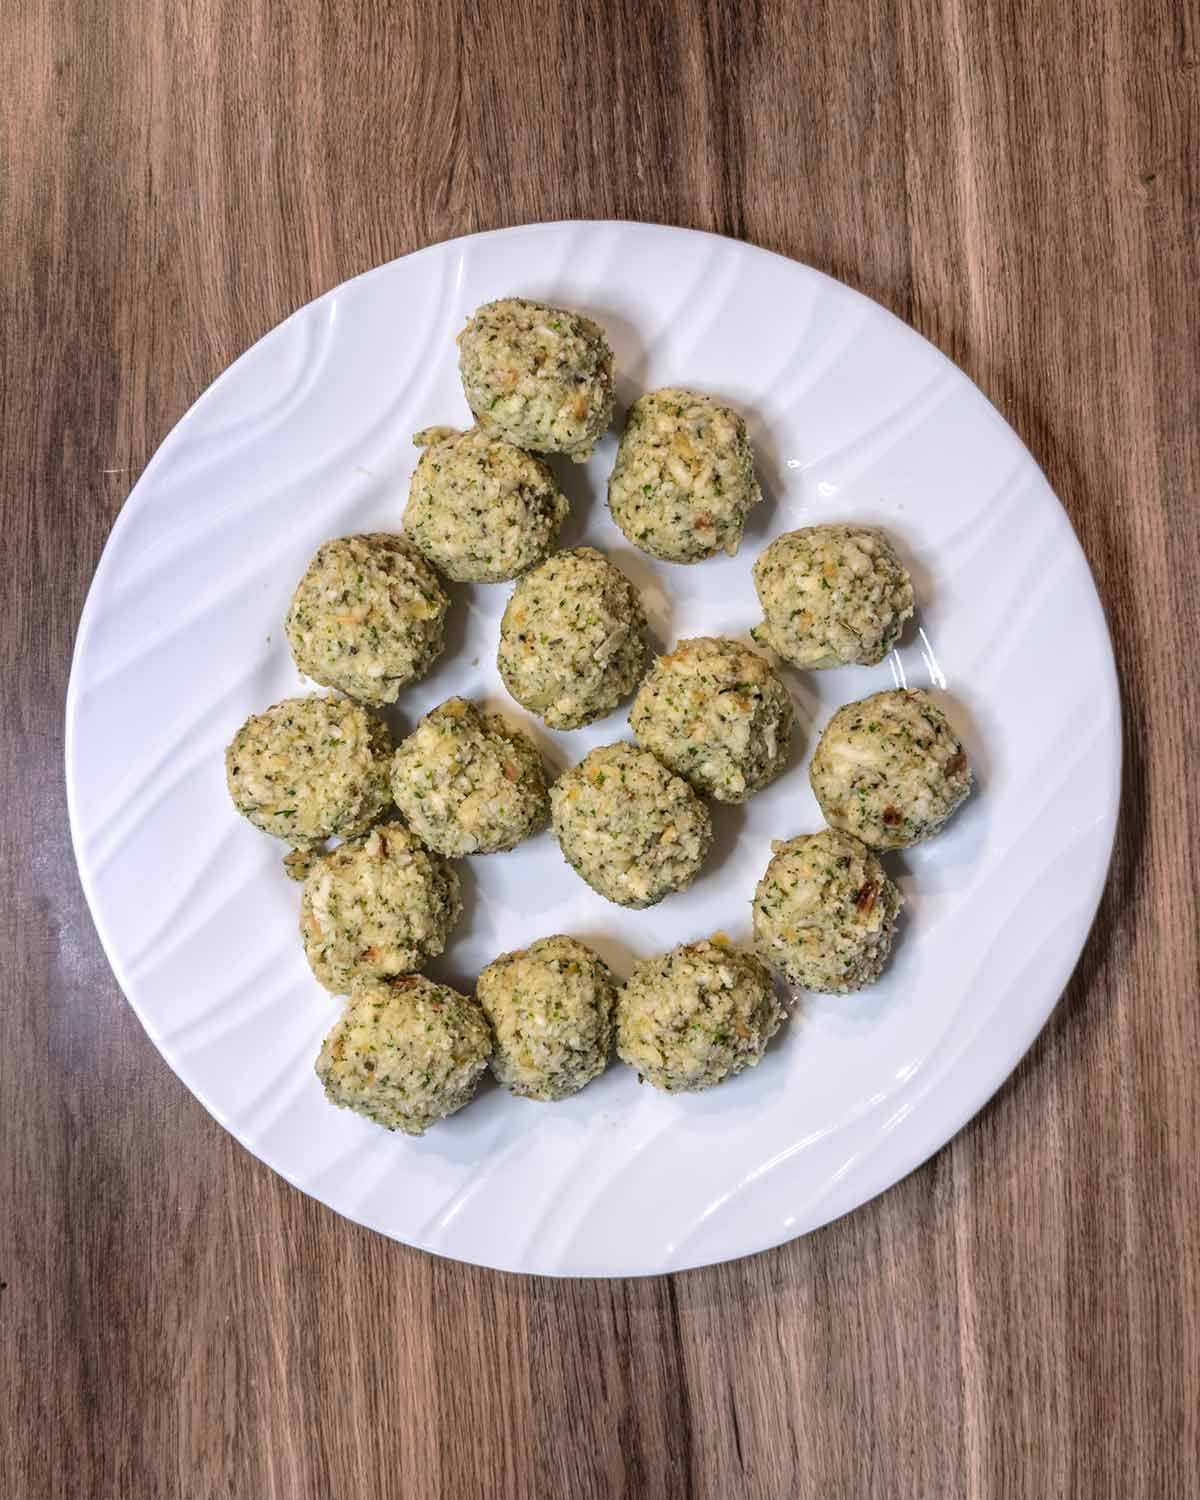 Sixteen uncooked stuffing balls on a plate.